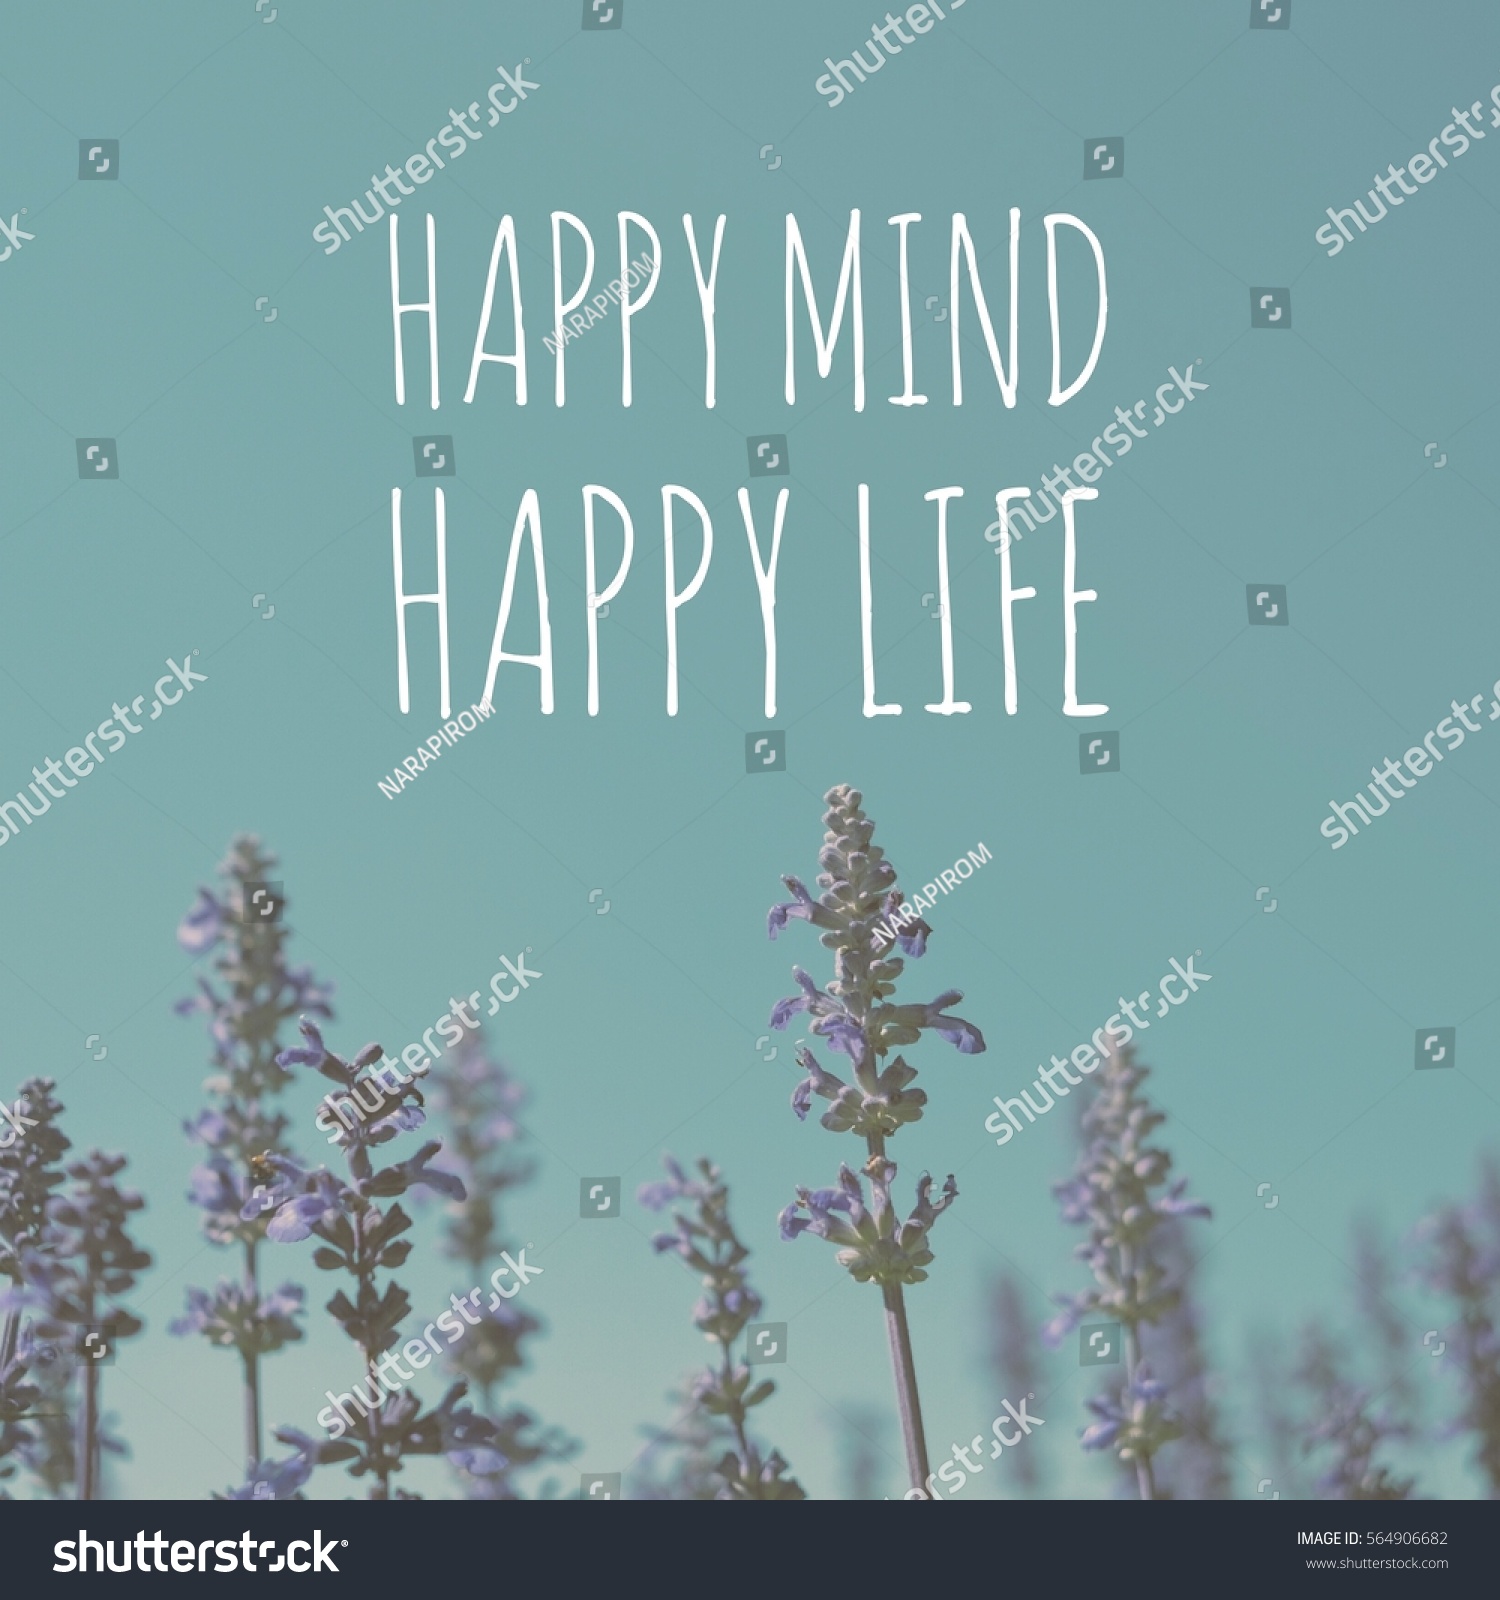 Inspiration motivation quote about happy life #564906682